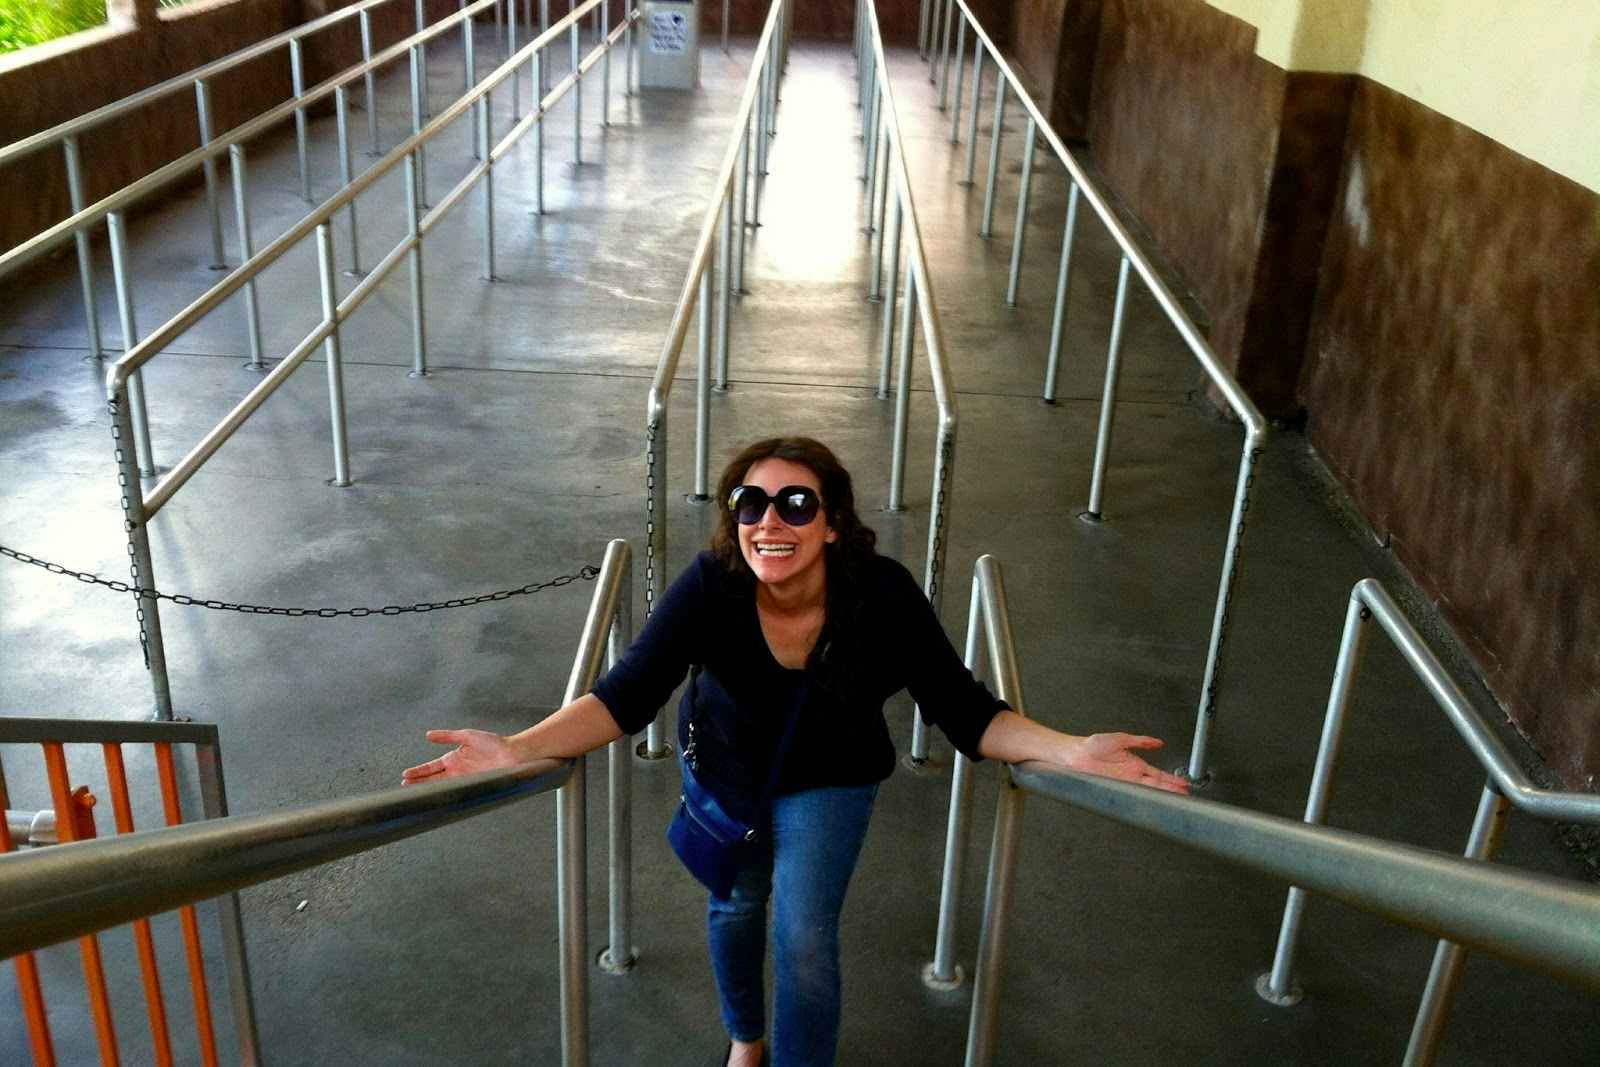 A person walking up a flight of stairs.